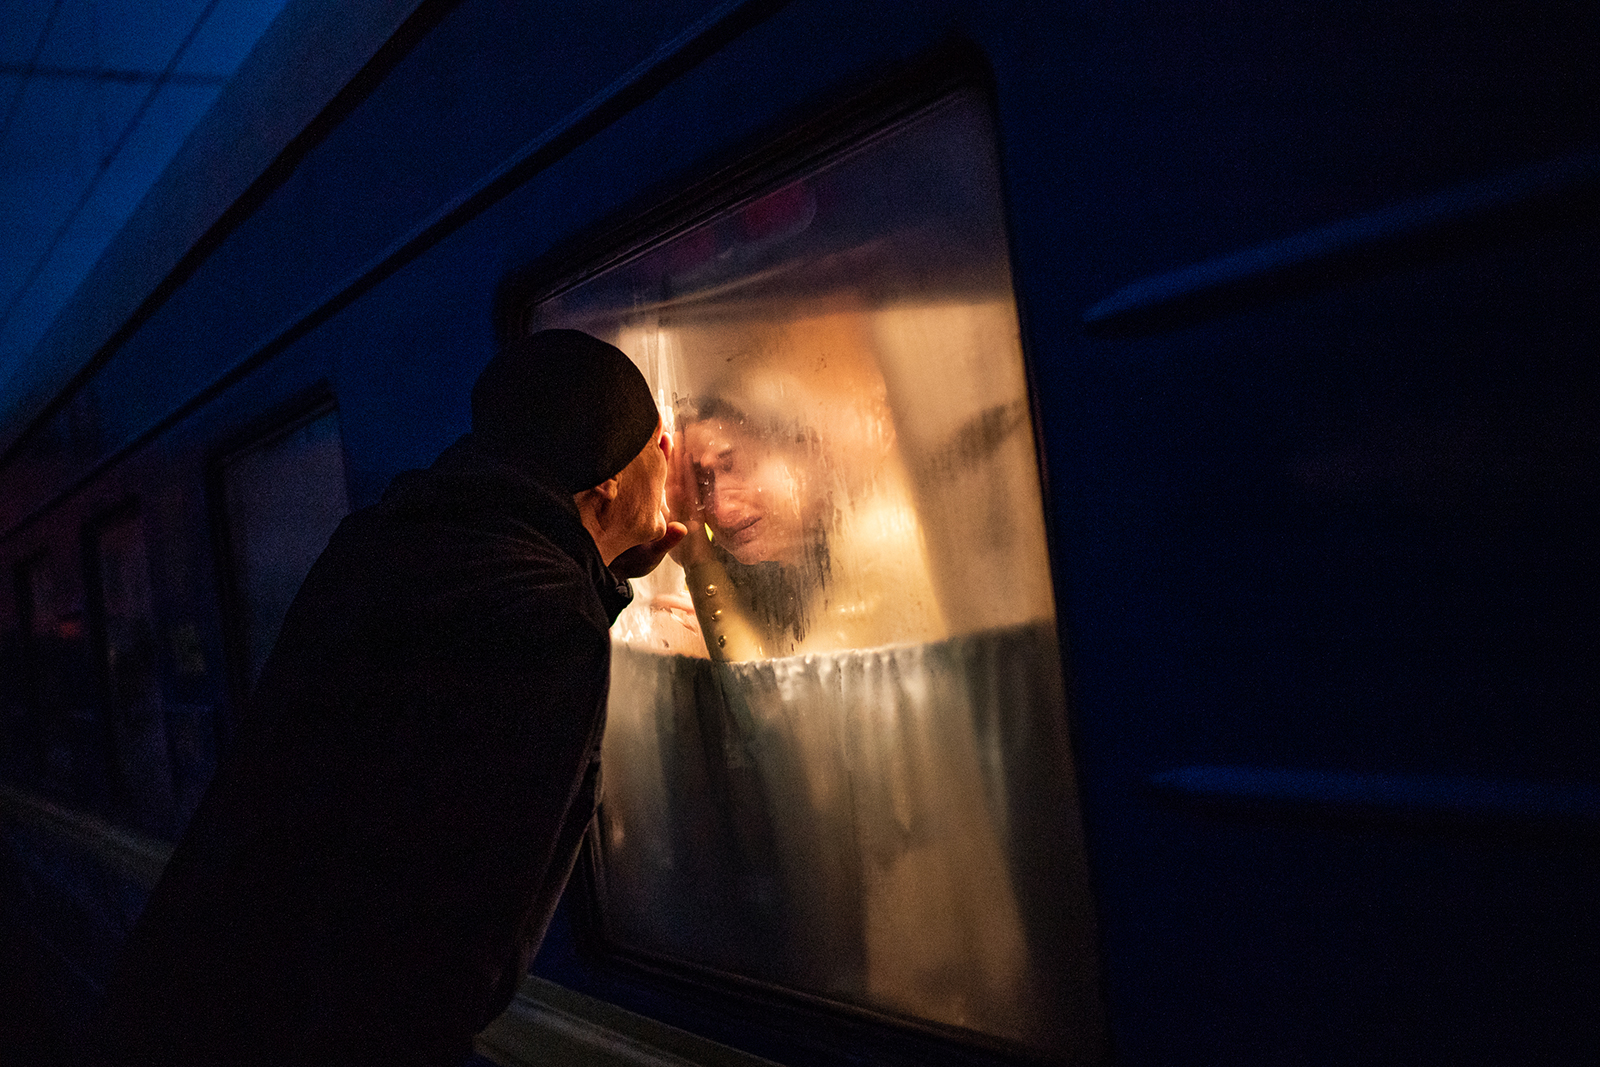 George Keburia says goodbye to his wife and children as they board a train to Lviv in Odessa, Ukraine, on Saturday, March 5.